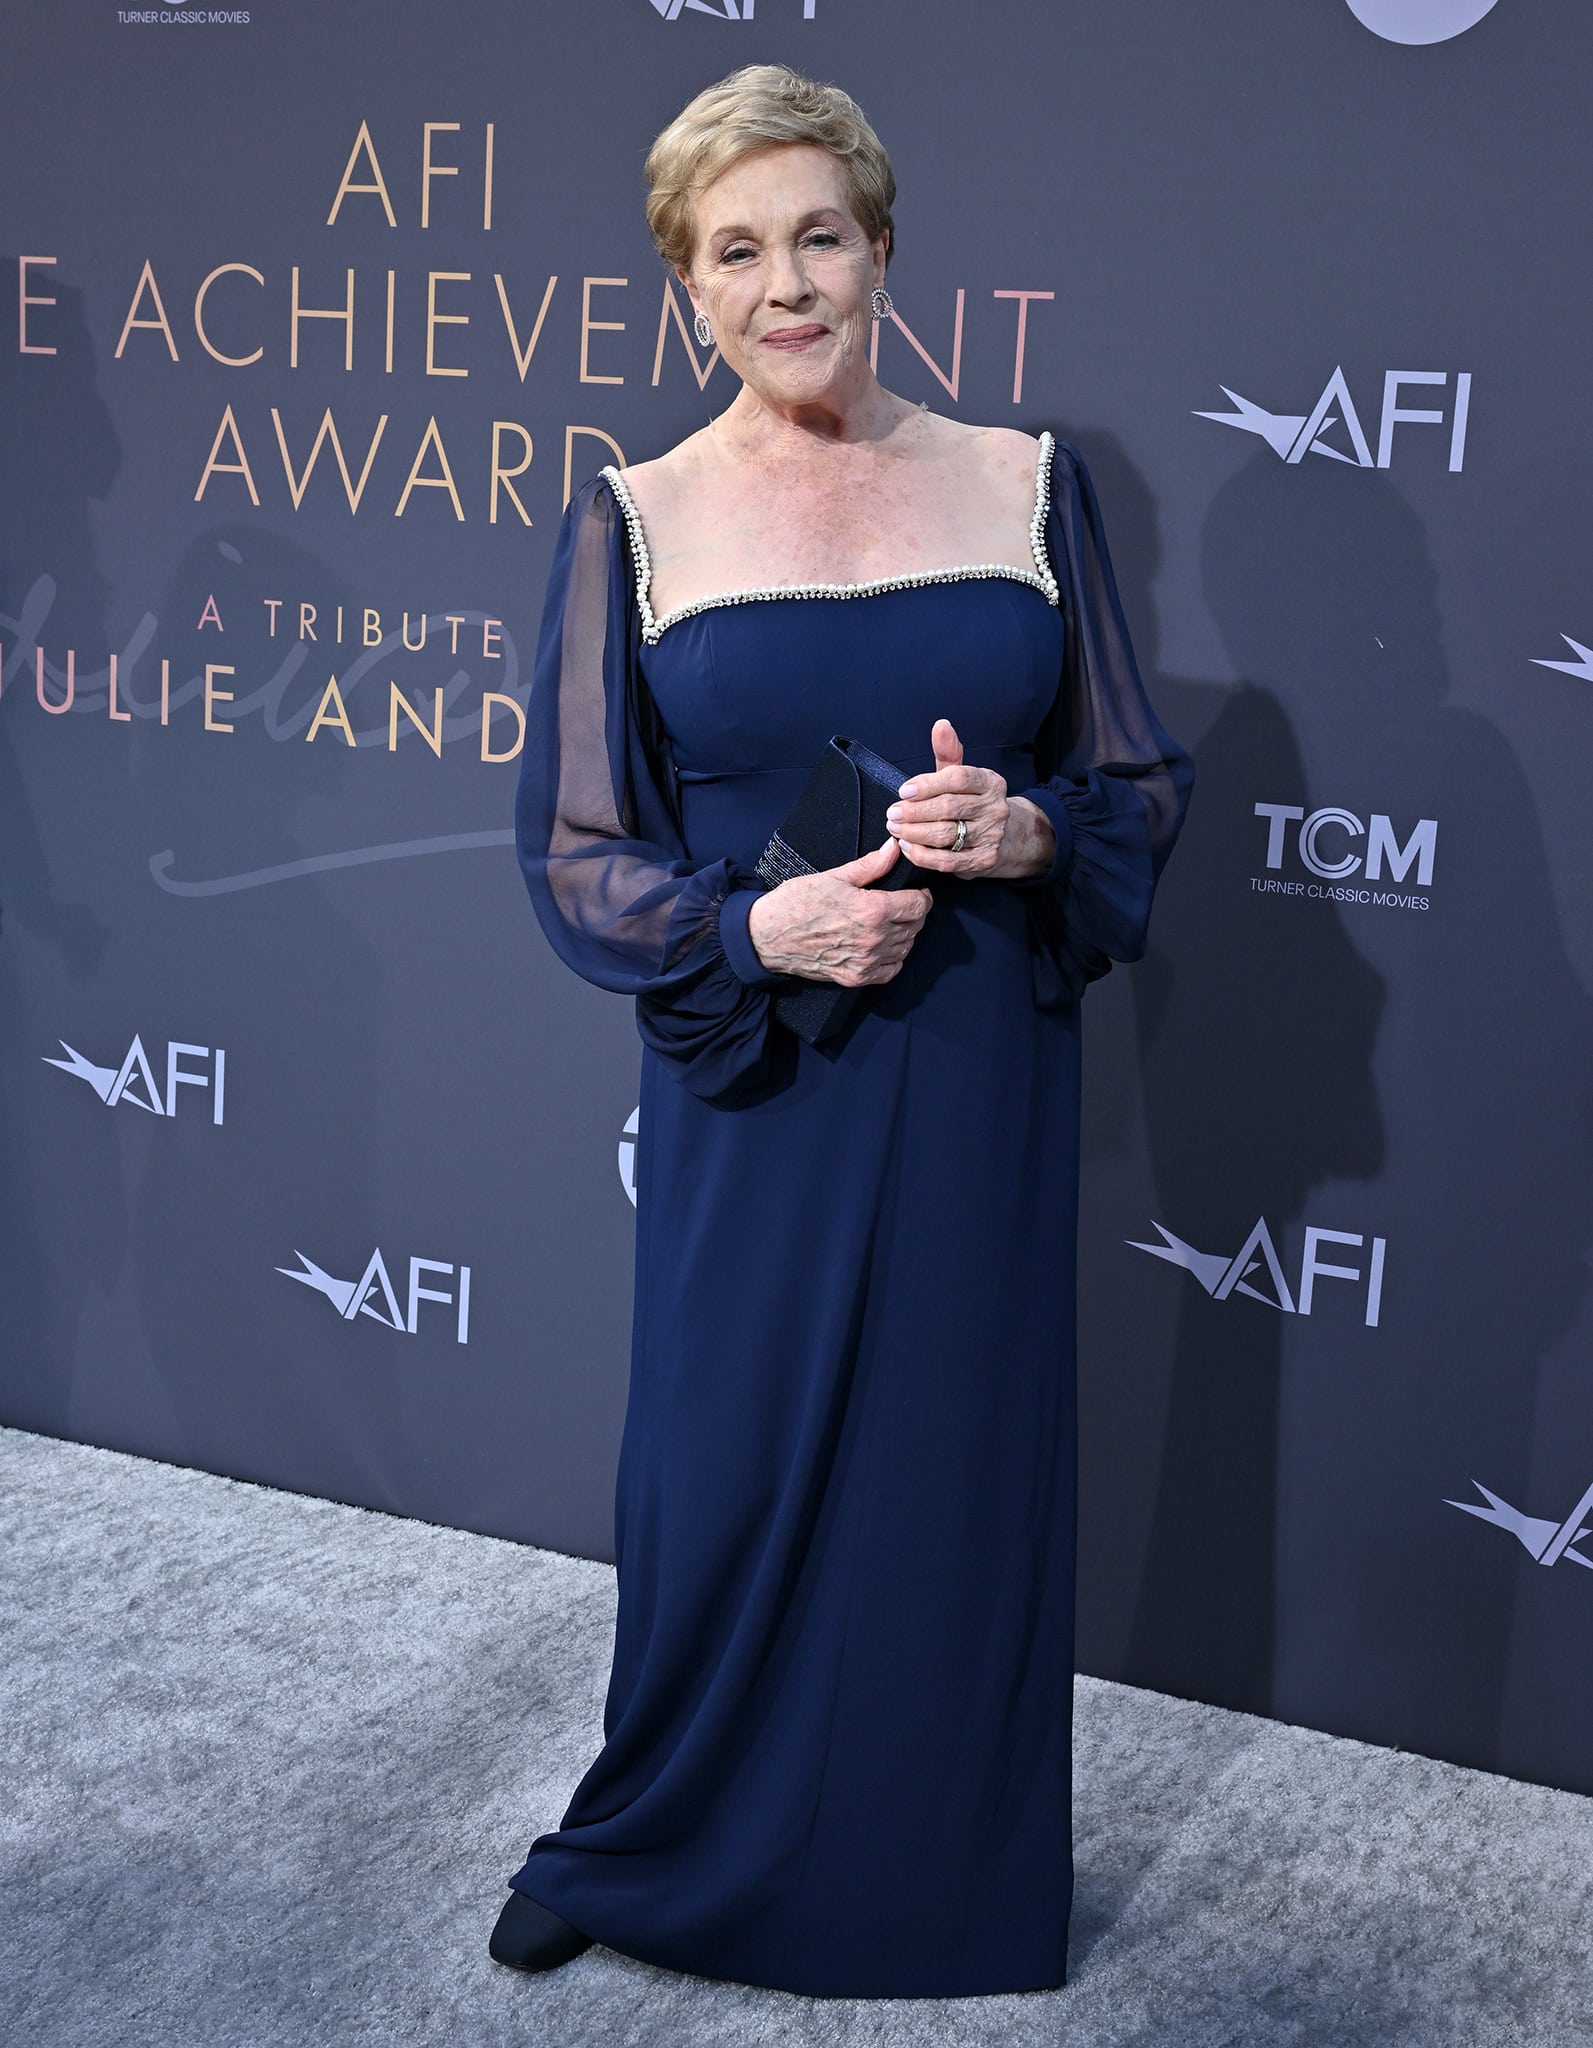 Julie Andrews was honored with the 48th Life Achievement Award by the American Film Institute